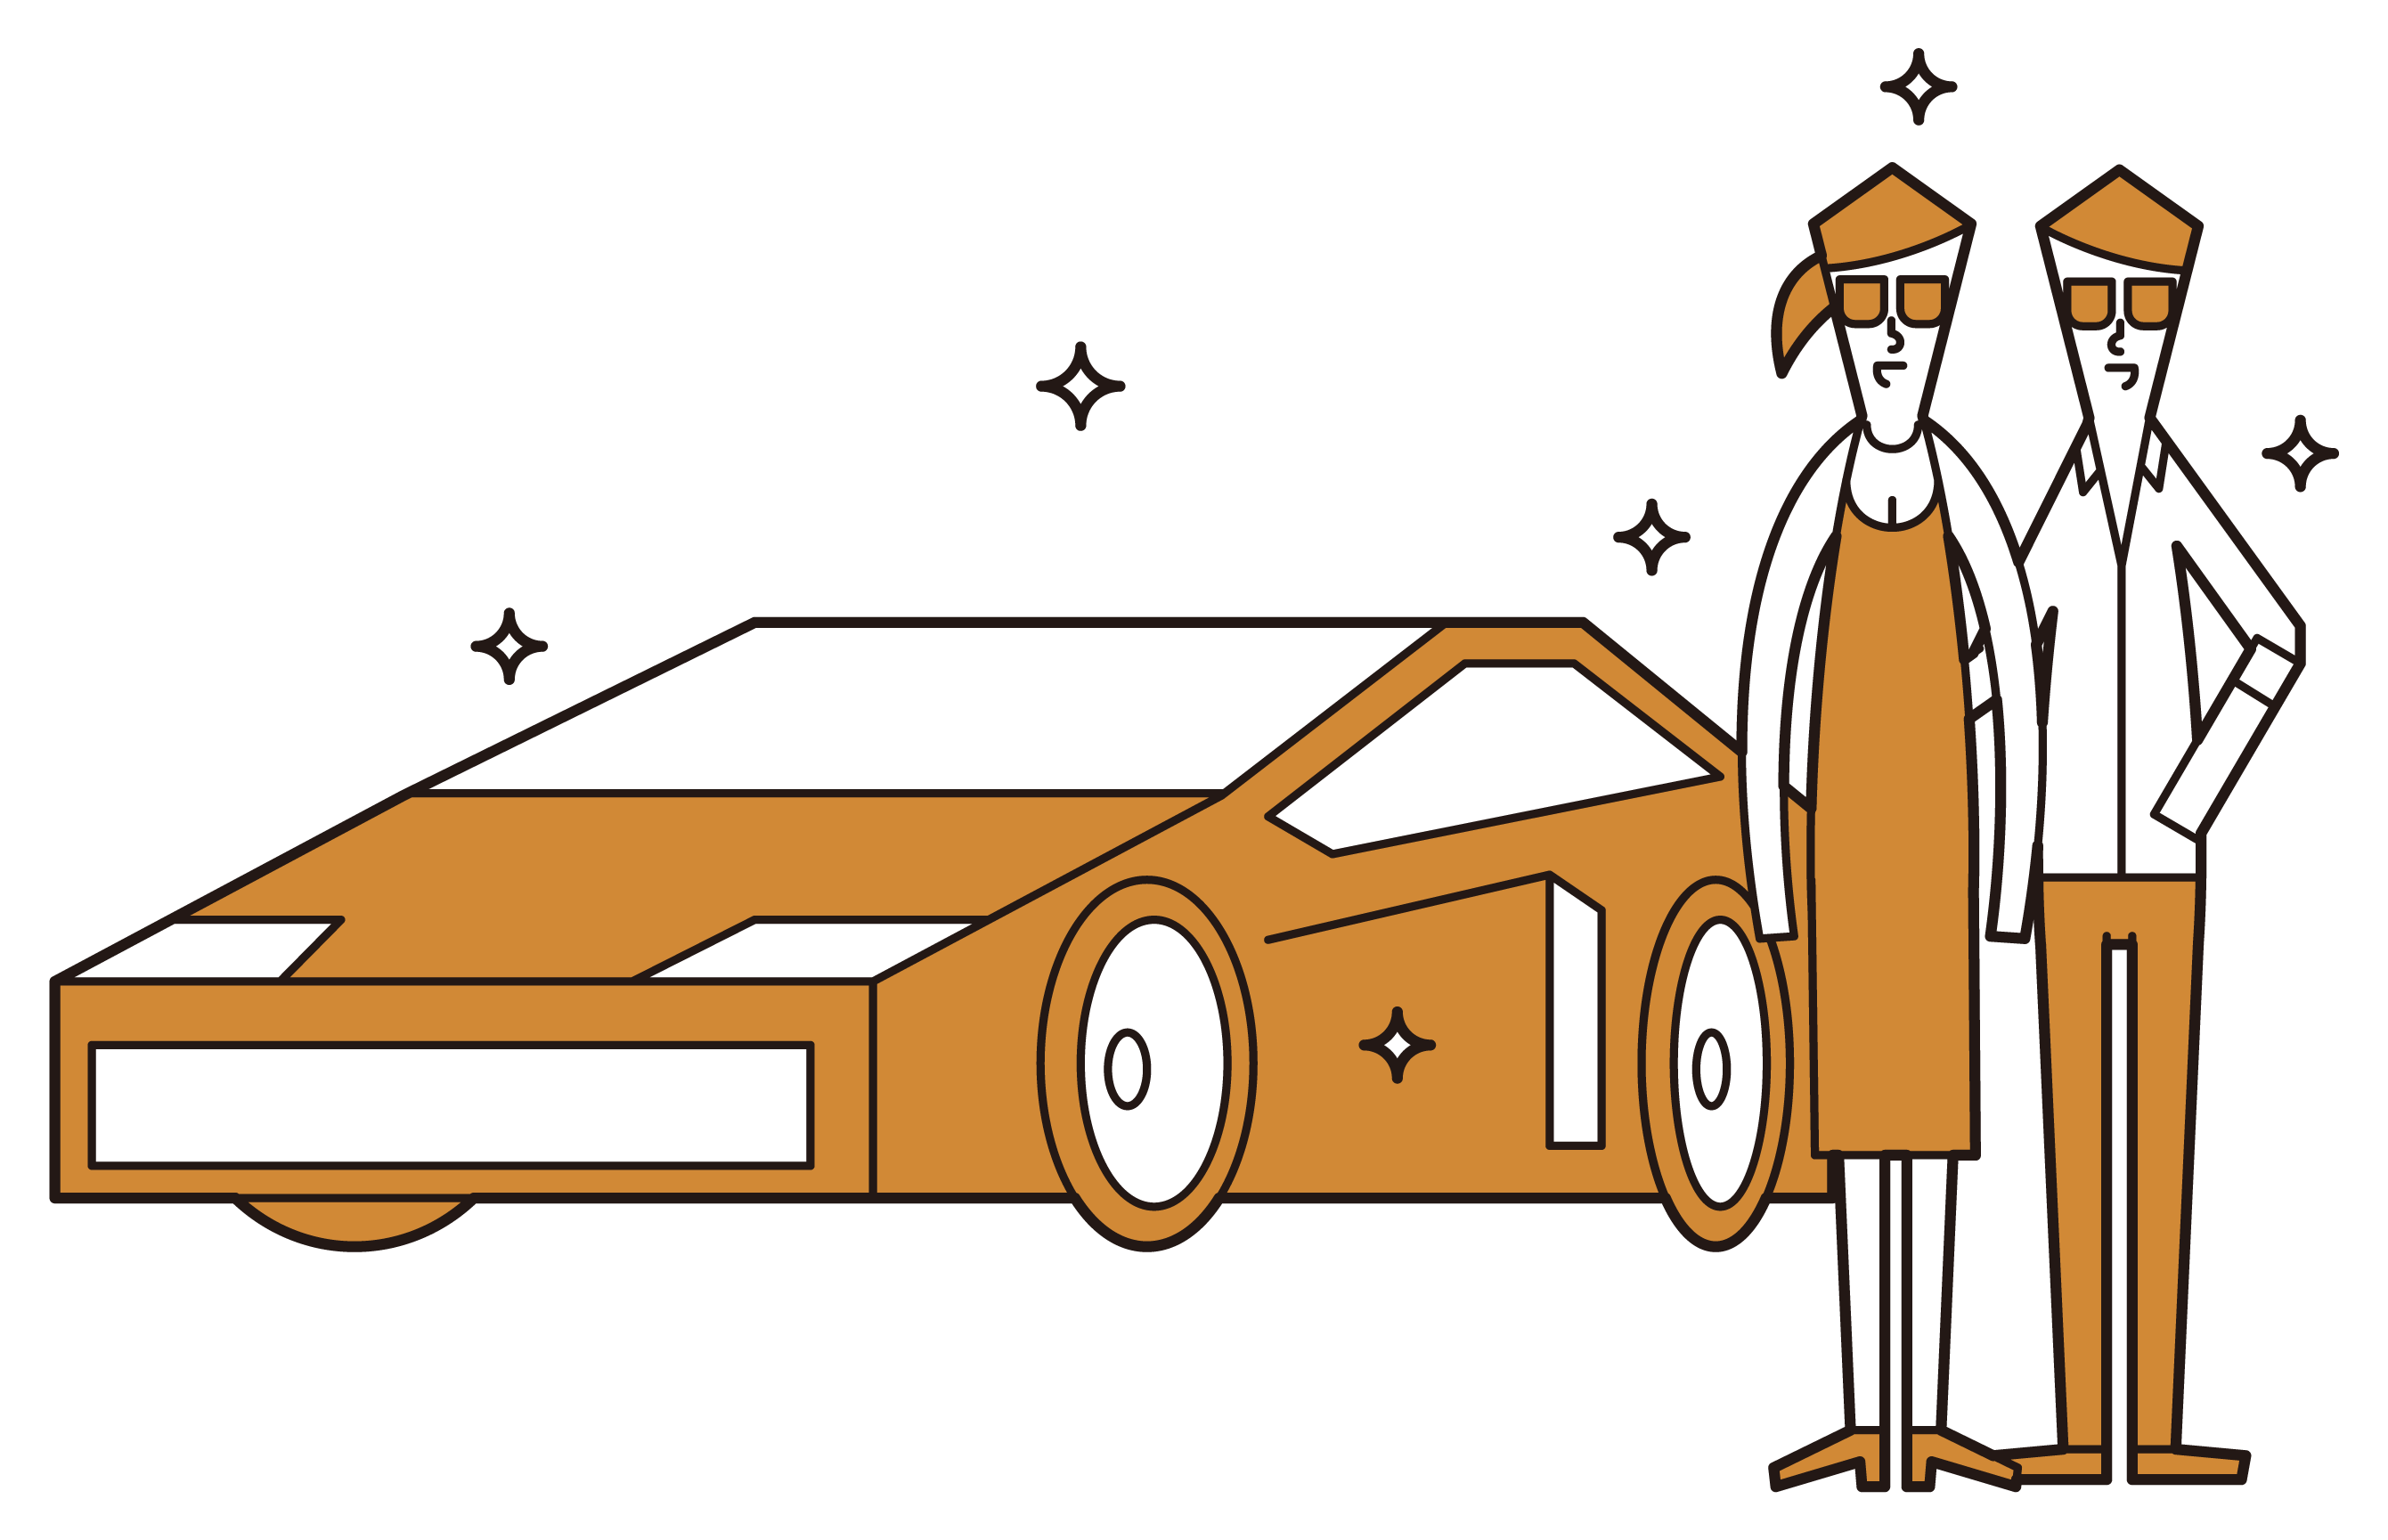 Illustration of a celebrity couple riding a supercar